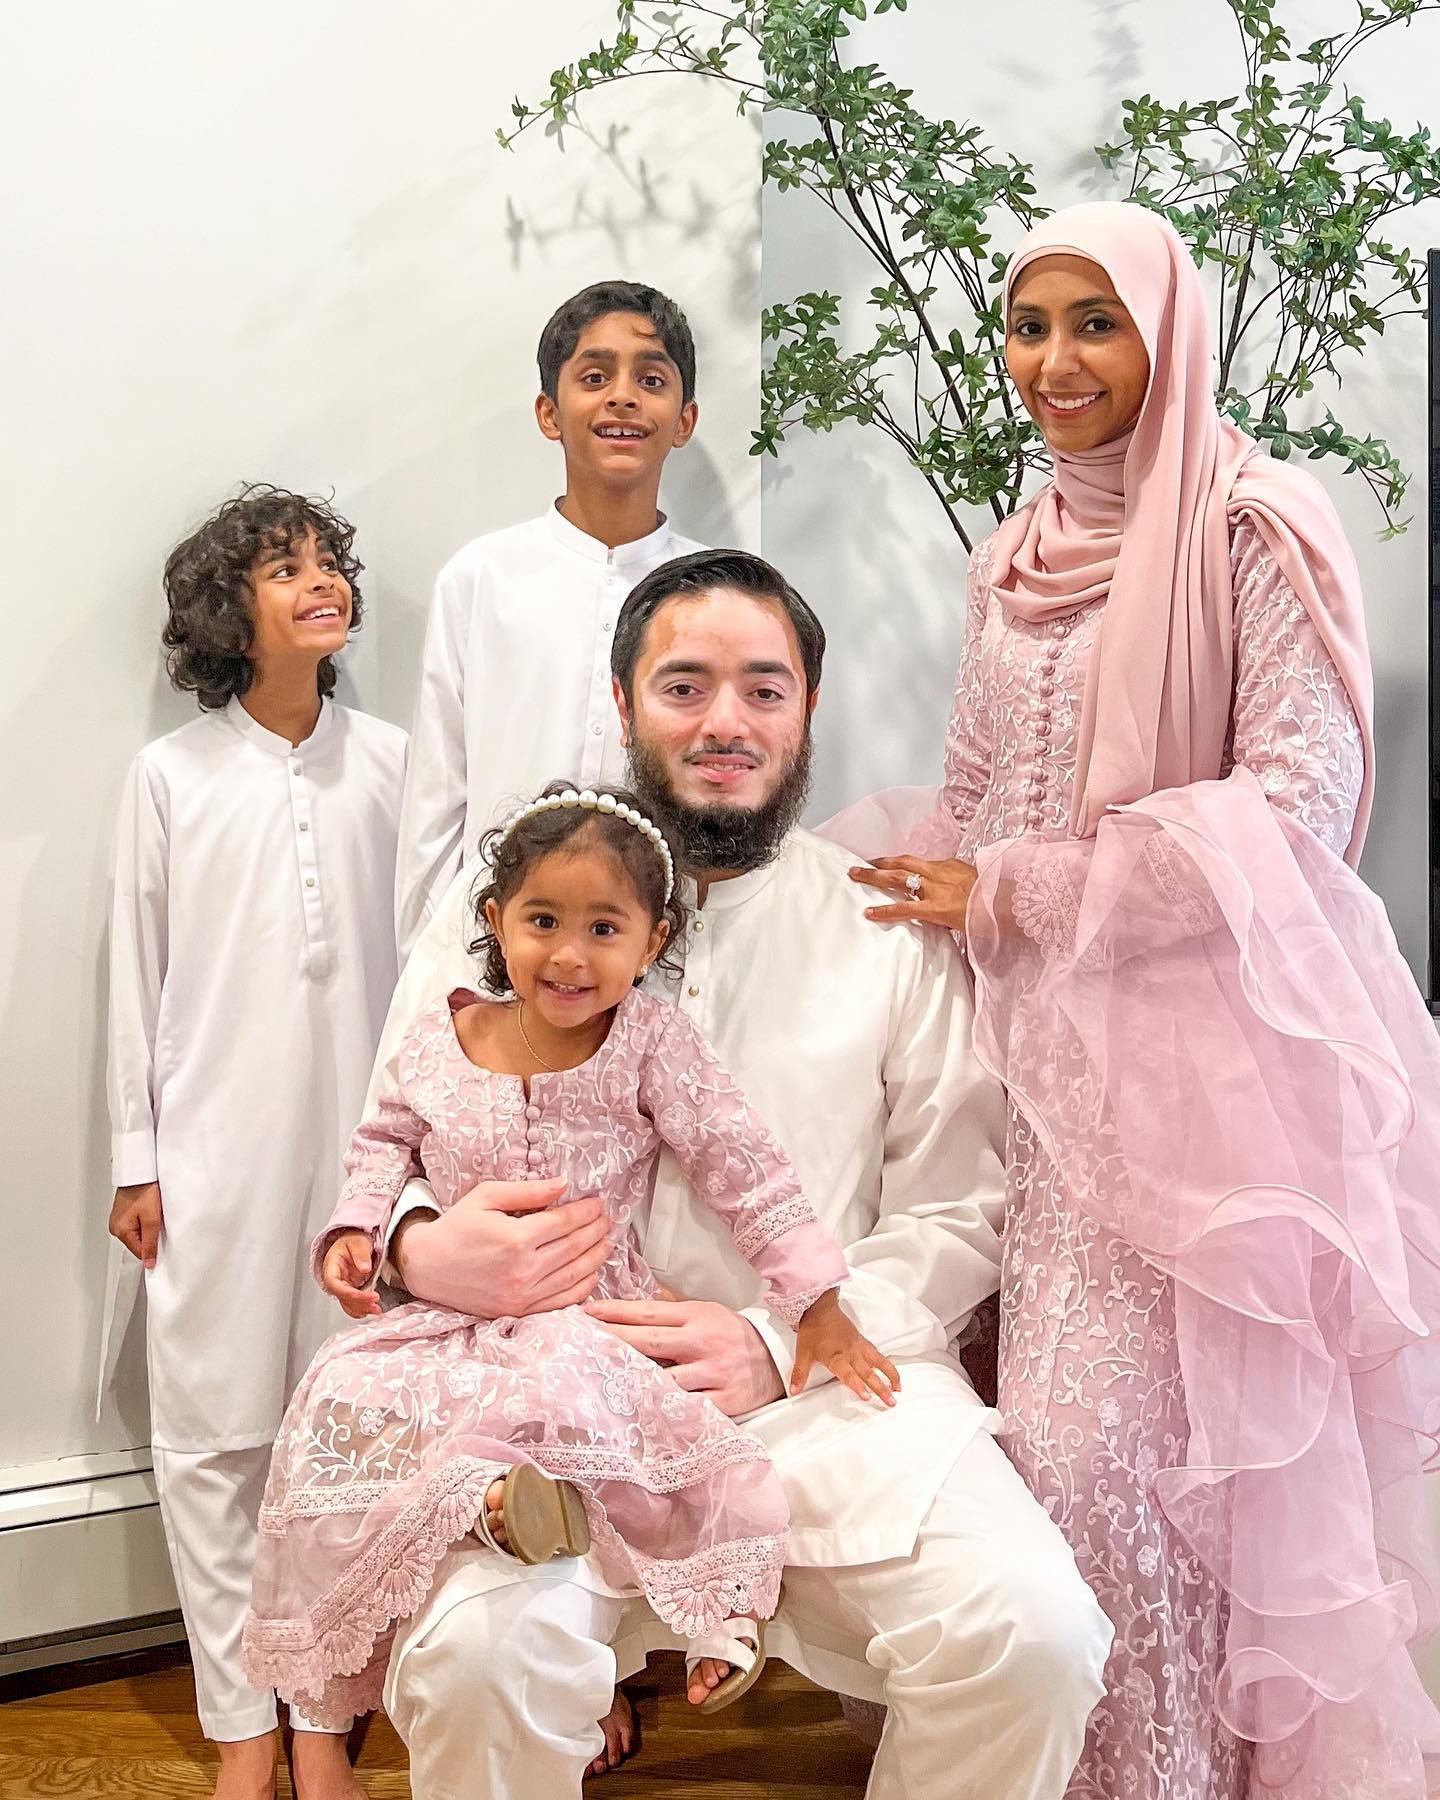 @thatmuslimmom and her adorable family matching blush pink cultural dresses and white thobes  